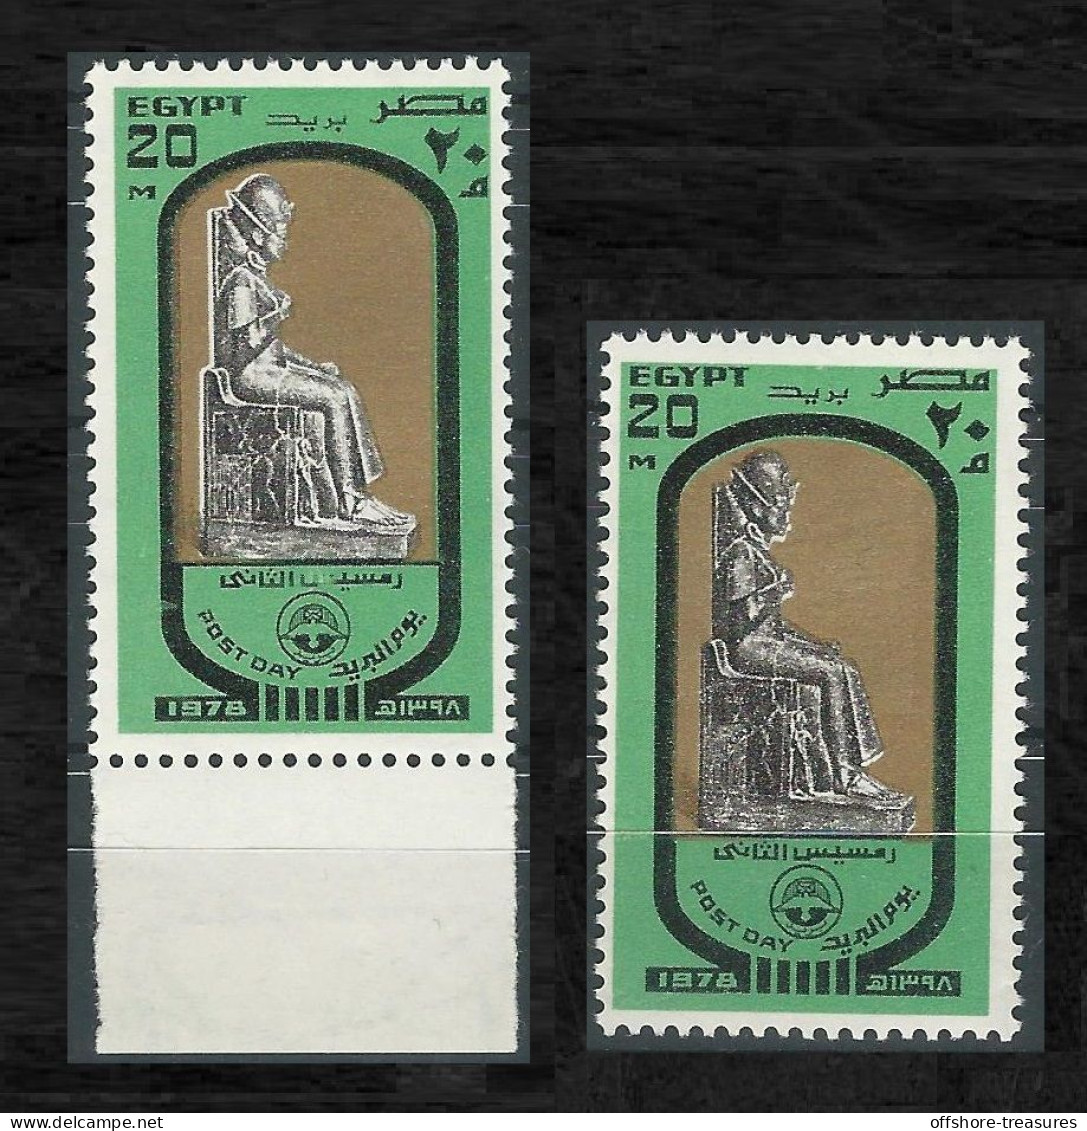 Egypt 1987 King Ramses Post Day 2 STAMP PRINT VARIETY / ERROR MNH STAMPS / SEE SCANS - Lettres & Documents